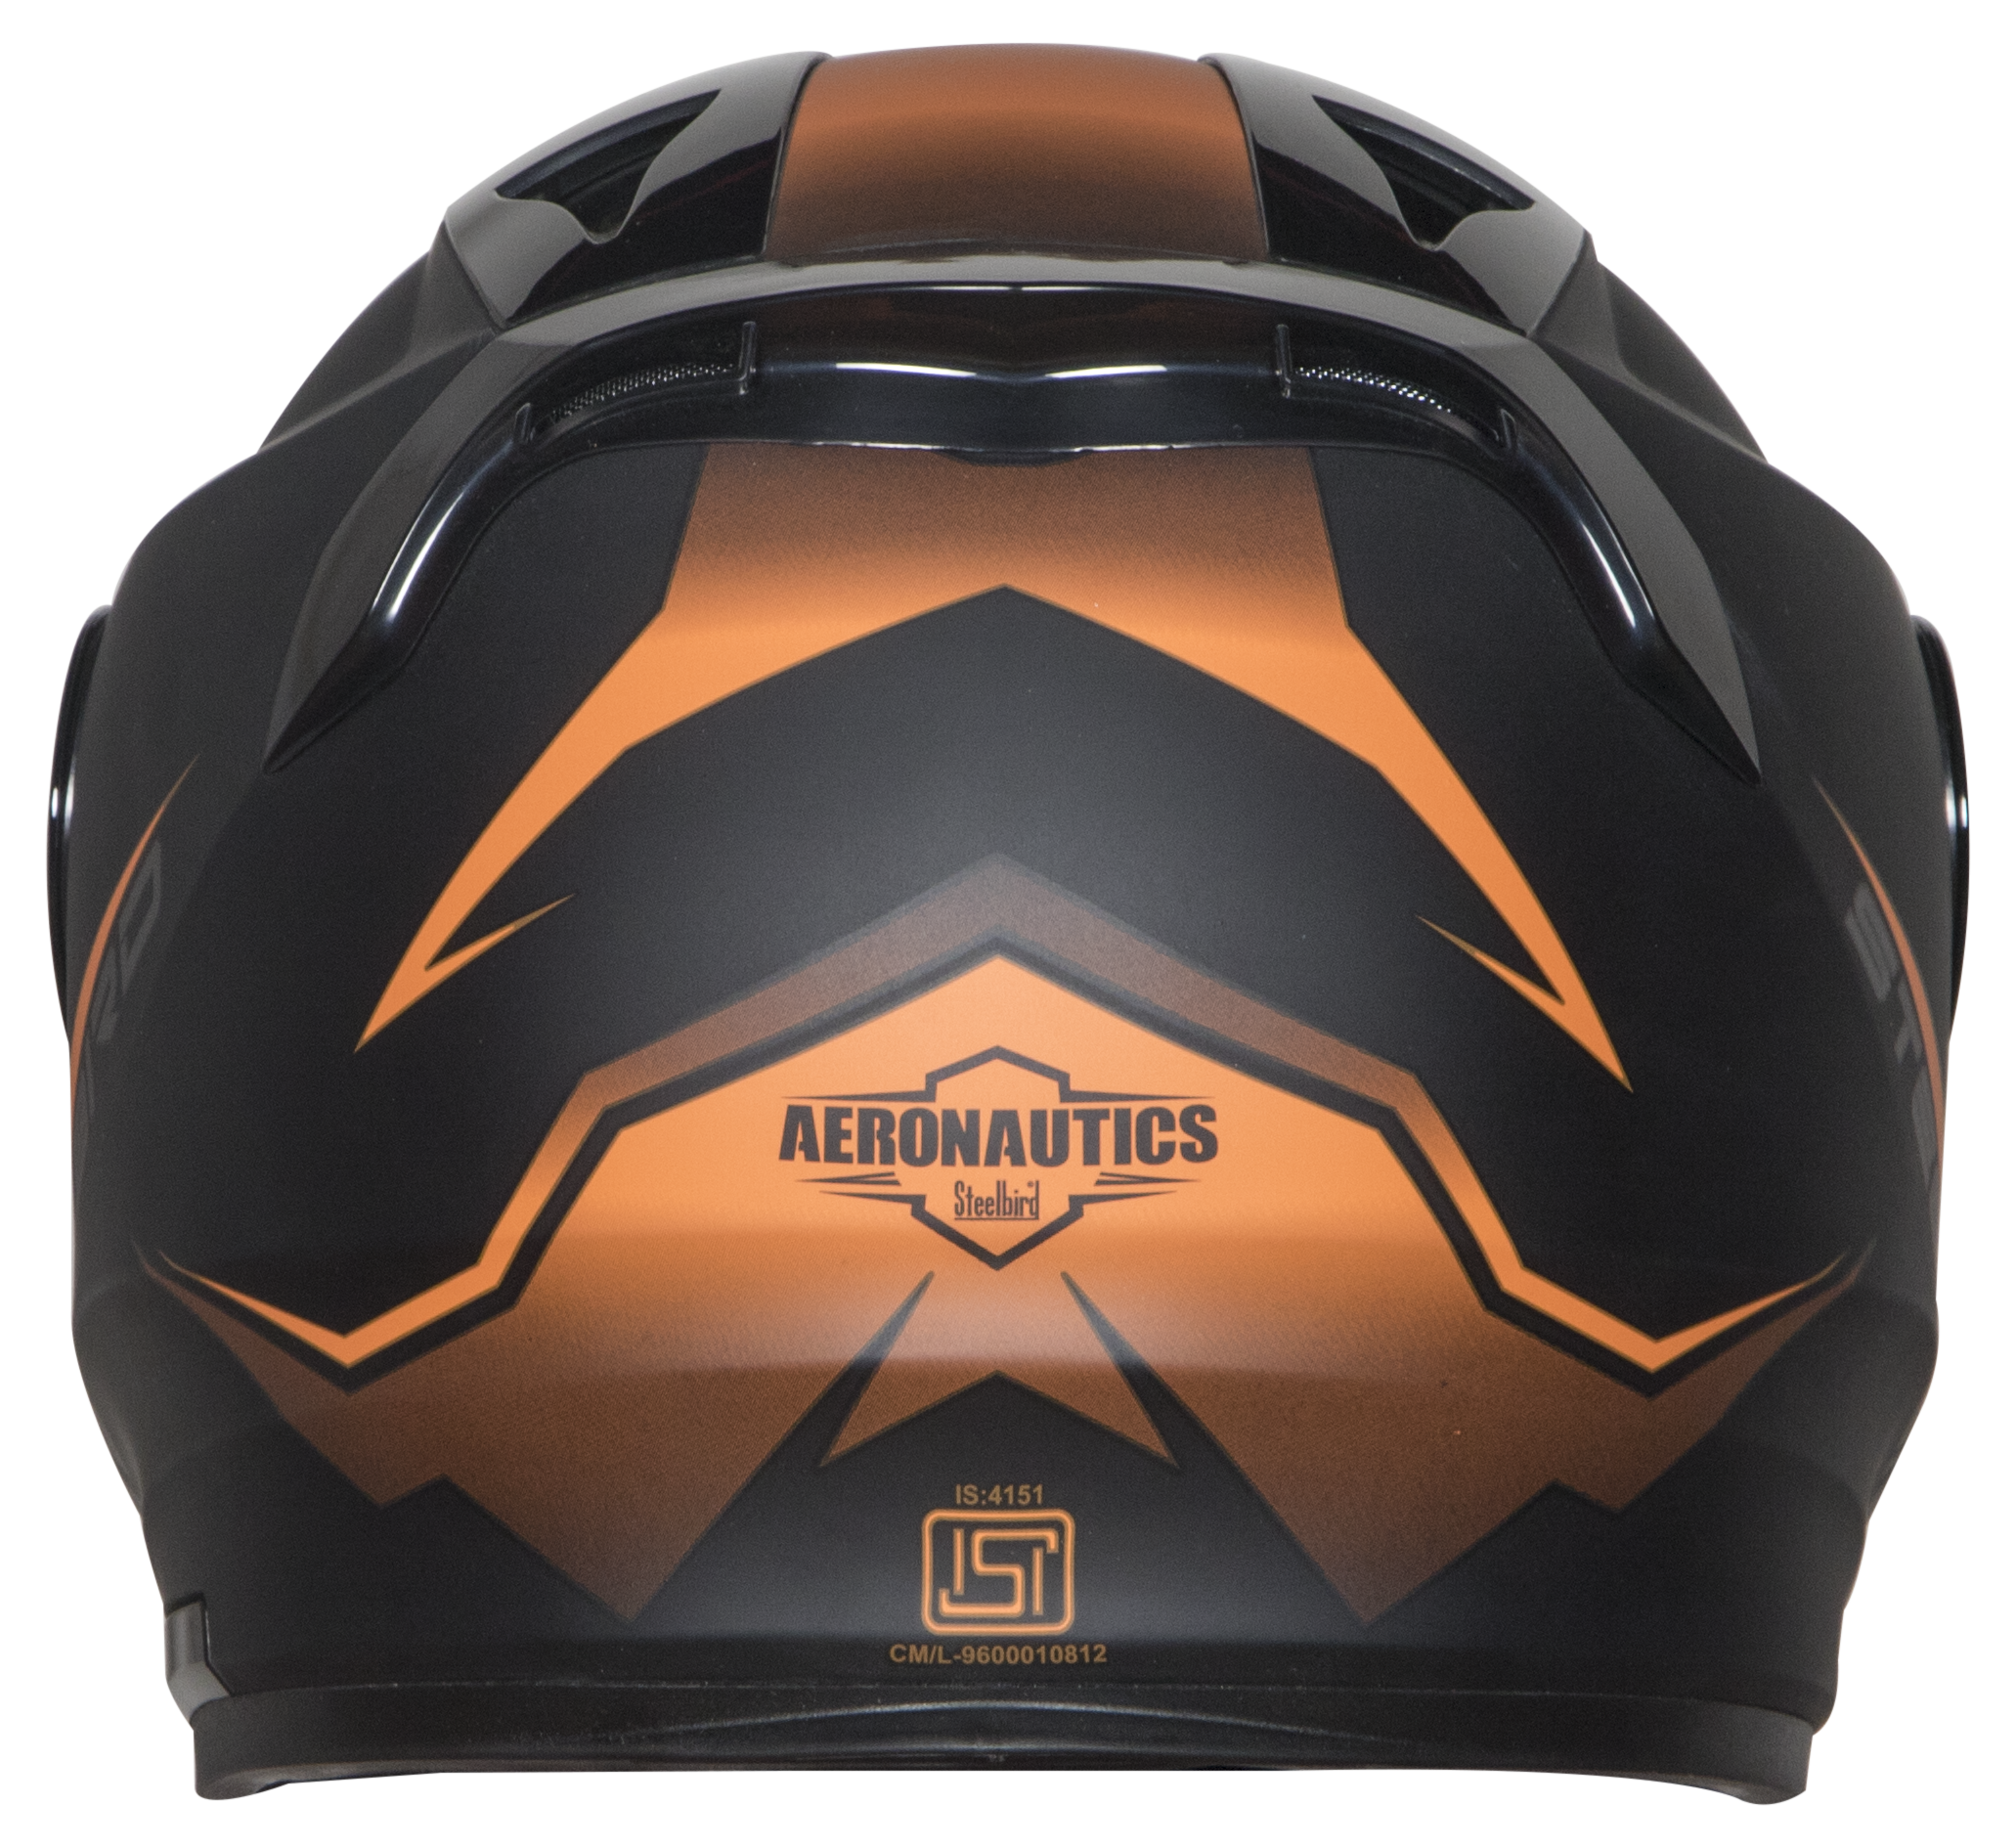 SA-1 WHIF Mat Black/Orange With (Fitted With Clear Visor Extra Anti-Fog Shield Chrome Rainbow Visor Free)